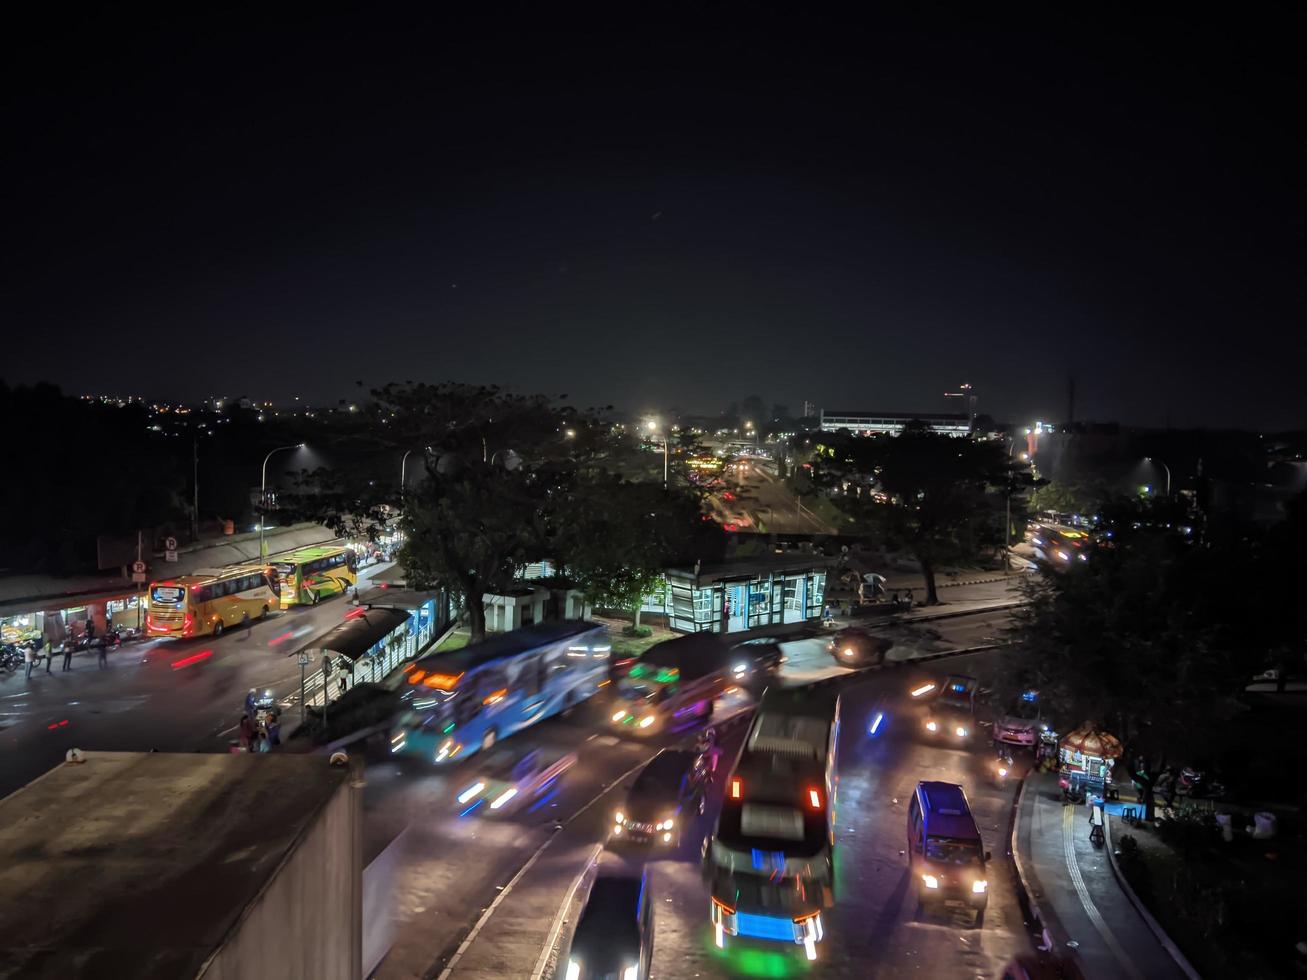 night view of city traffic seen bus stop and several other vehicles photo